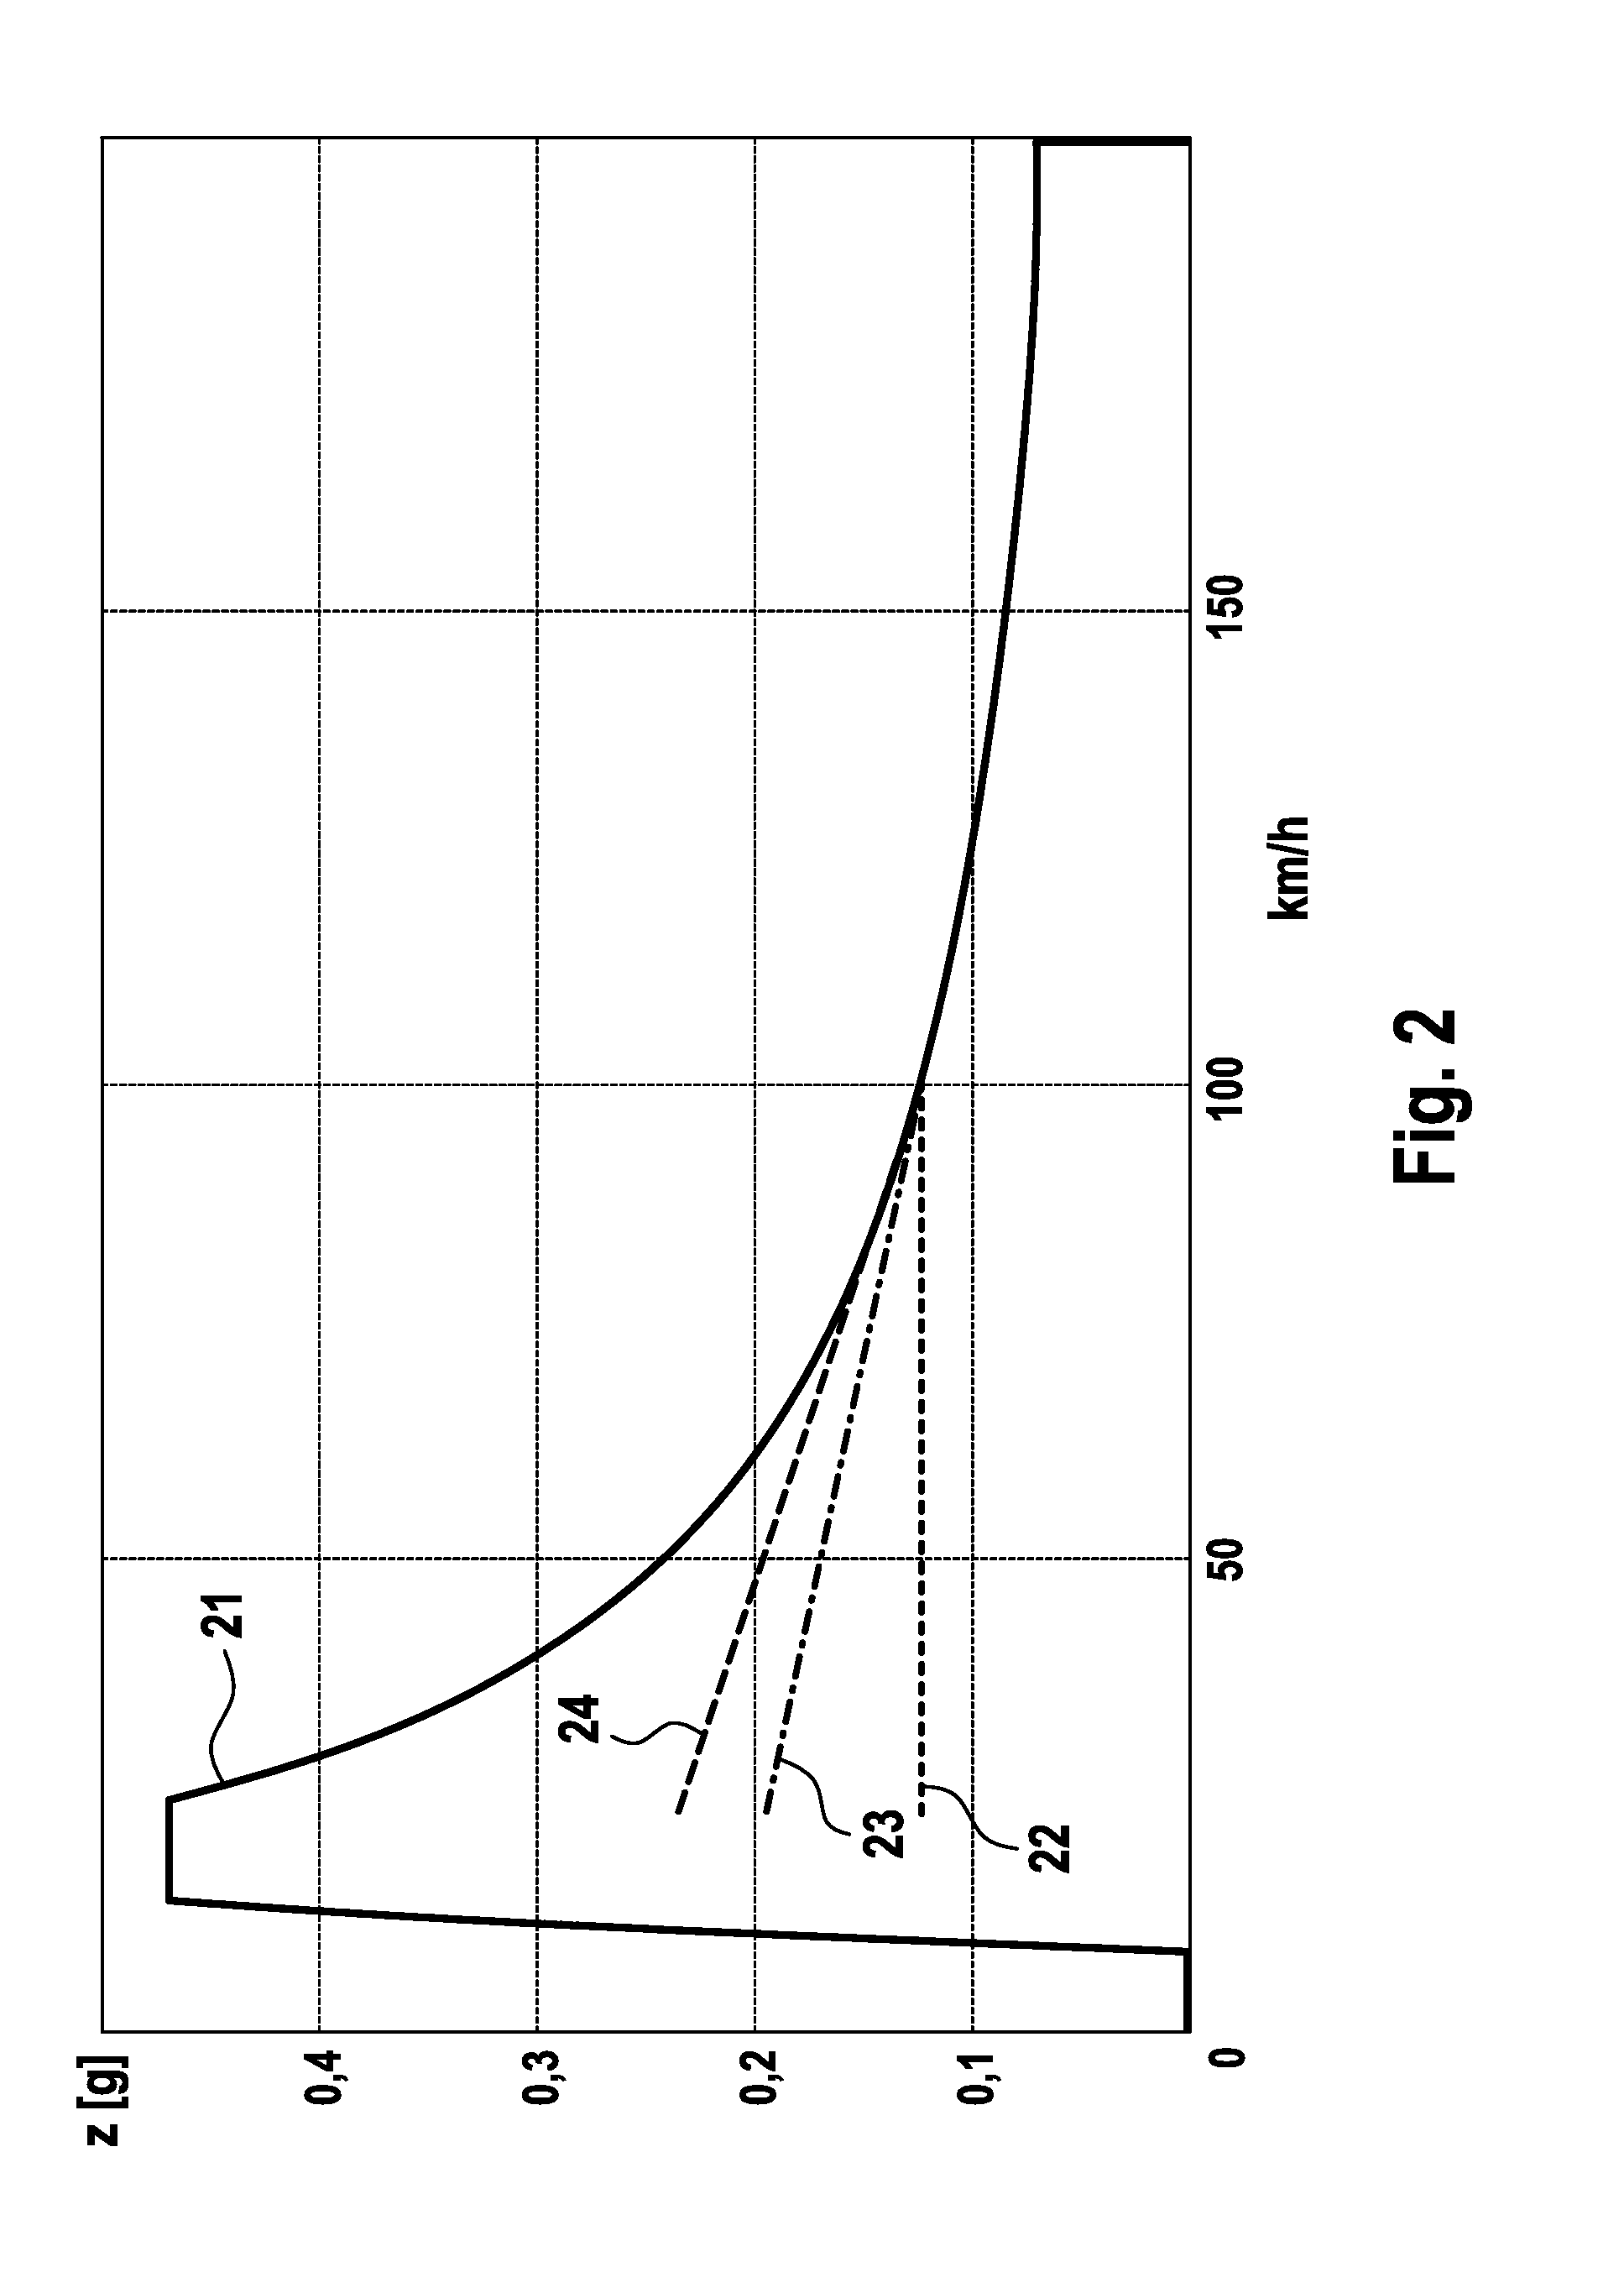 Method for Controlling a Motor Vehicle Brake System